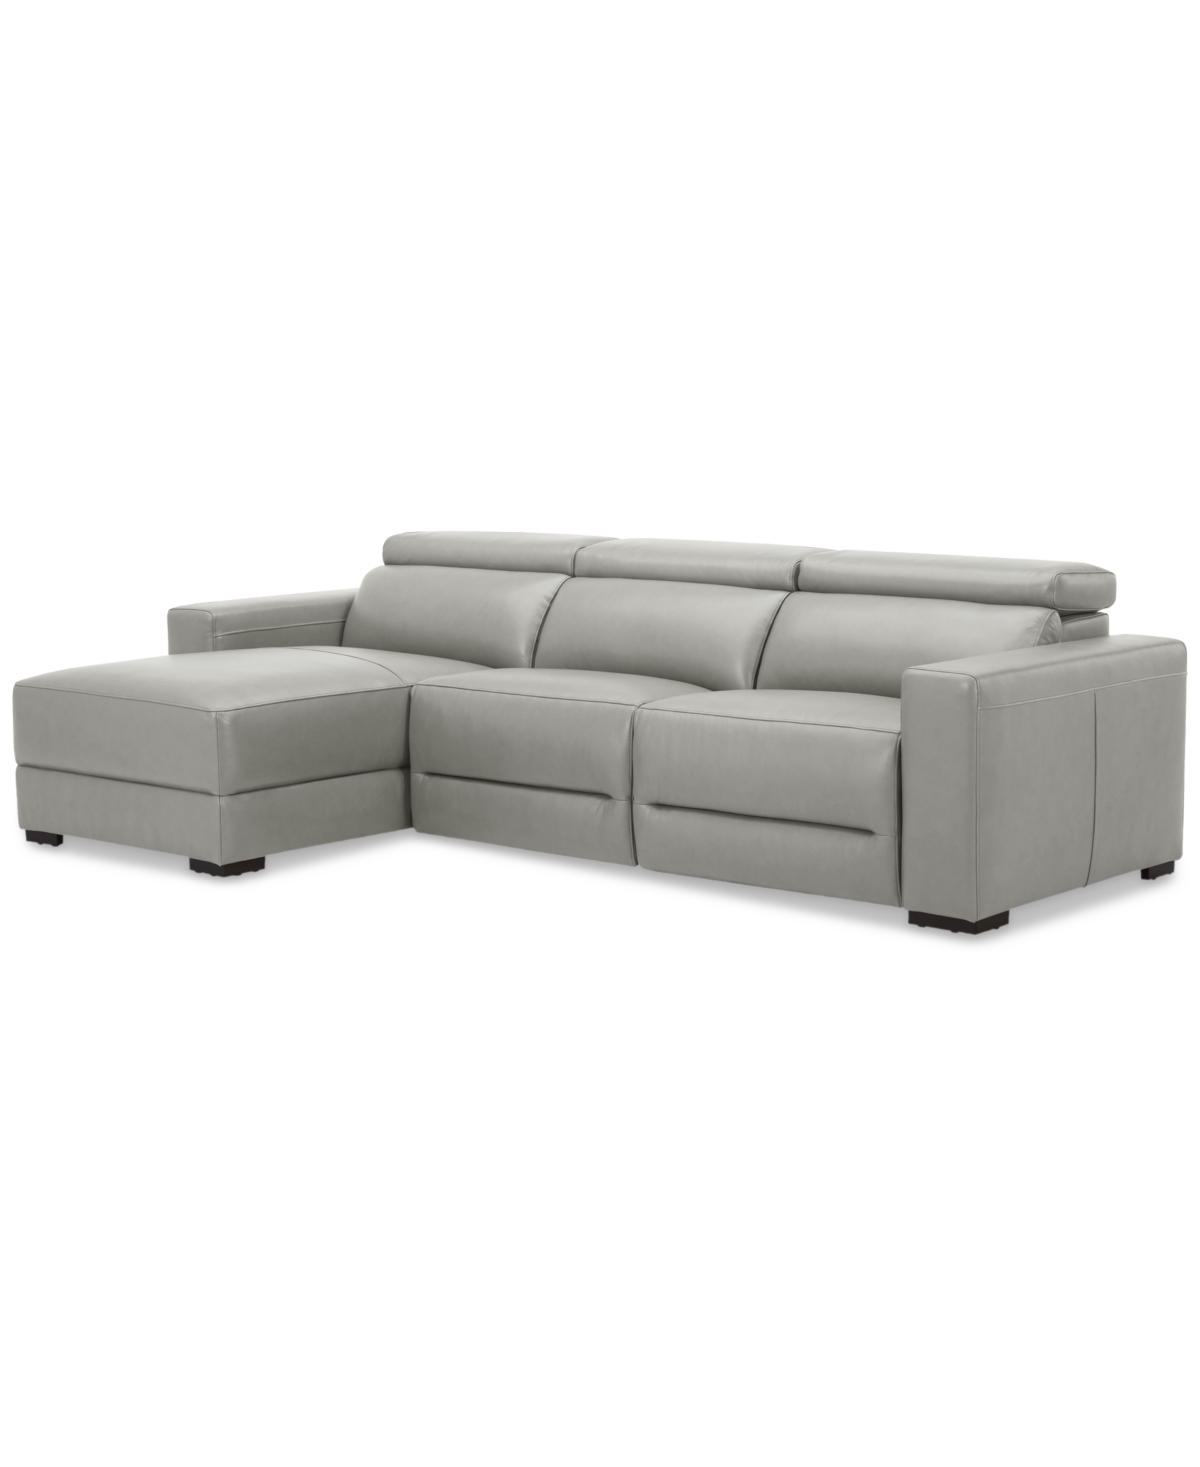 Macy's Nevio 115" 3-pc. Leather Sectional With 2 Power Recliners, Headrests And Chaise, Created For  In Light Grey